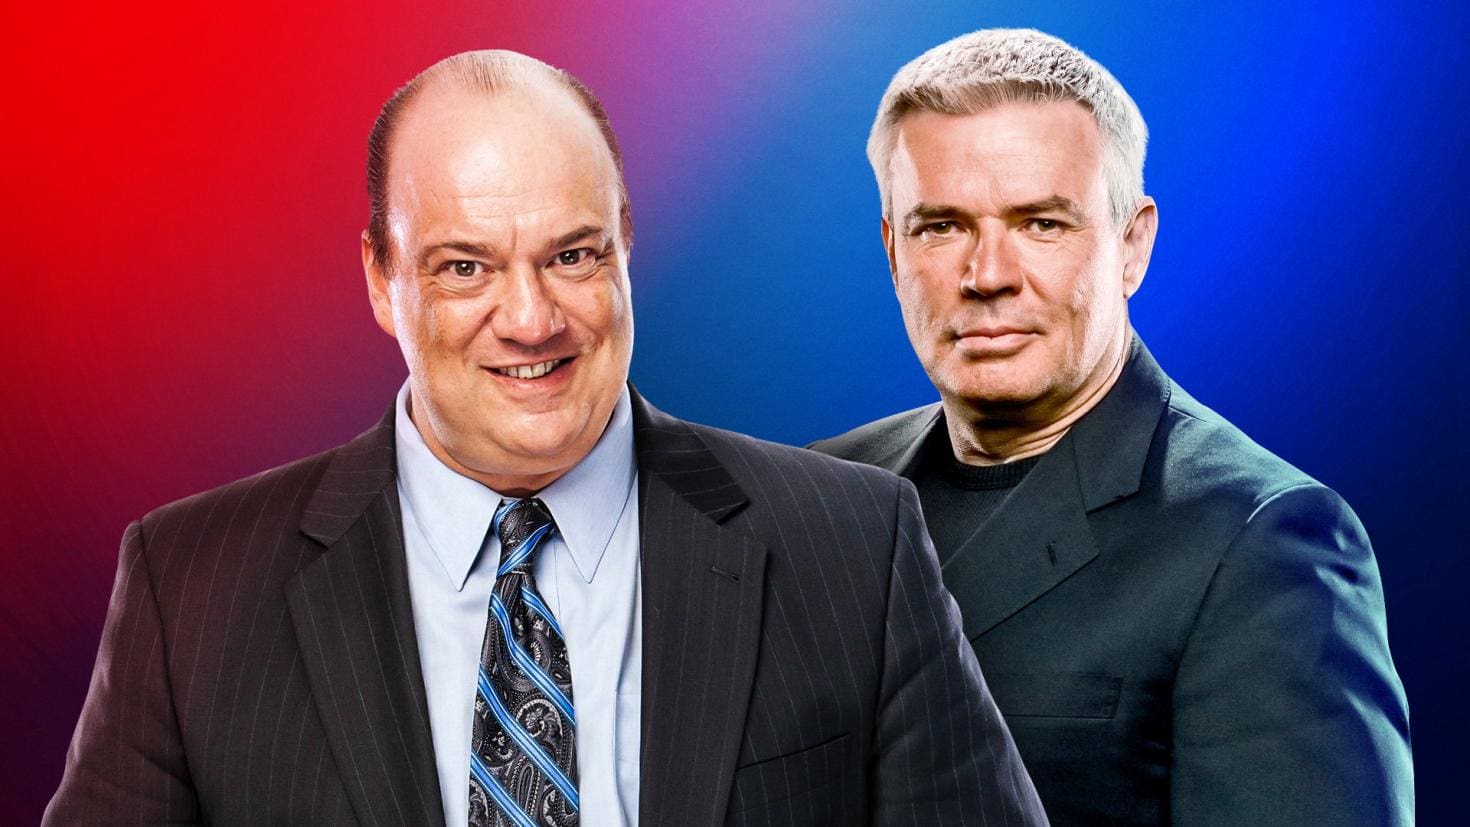 Eric Bischoff And Paul Heyman Set For WWE Executive Director Roles With RAW & SmackDown Live